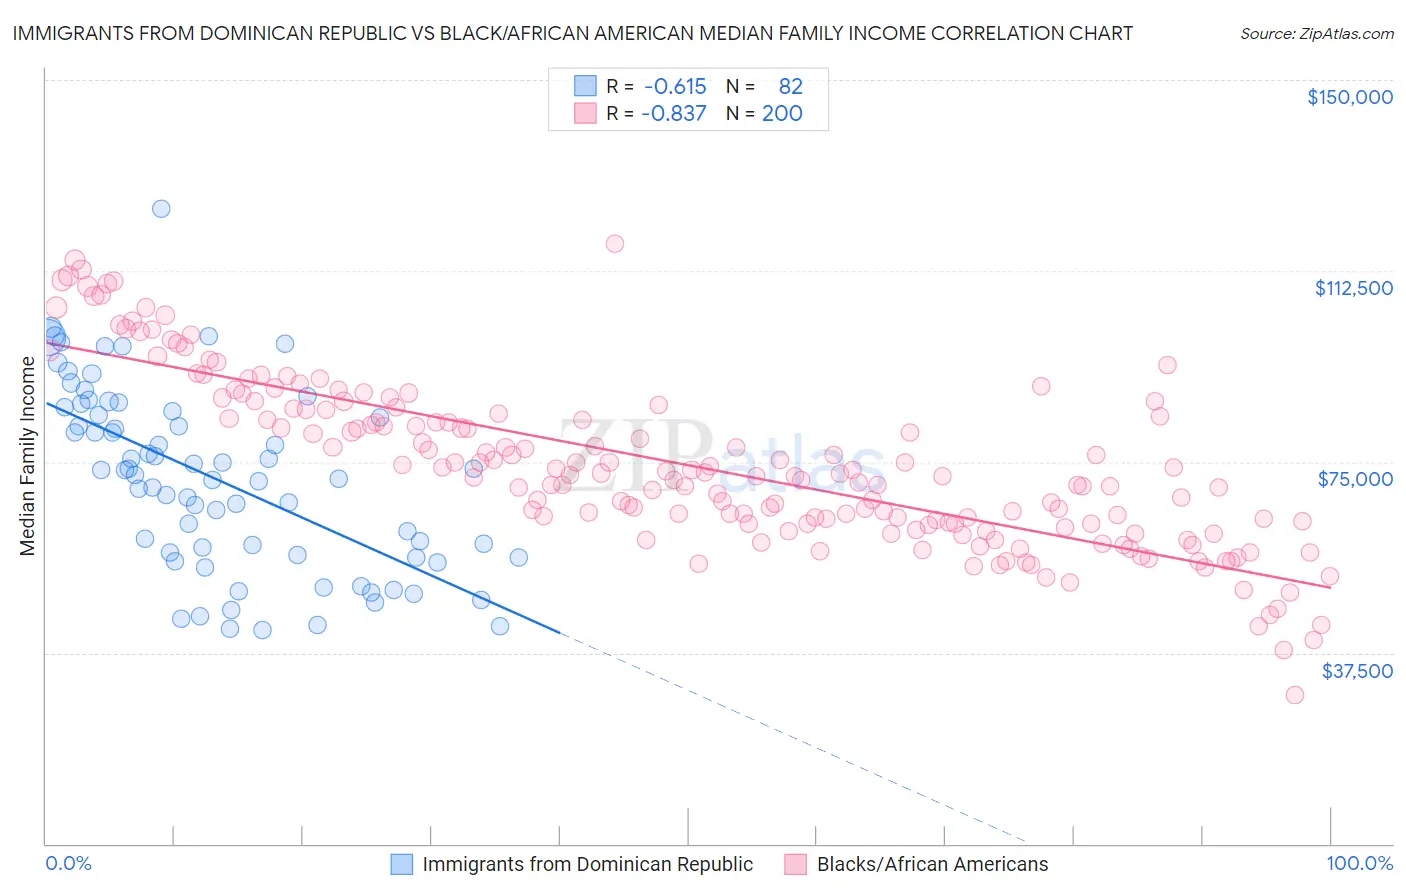 Immigrants from Dominican Republic vs Black/African American Median Family Income